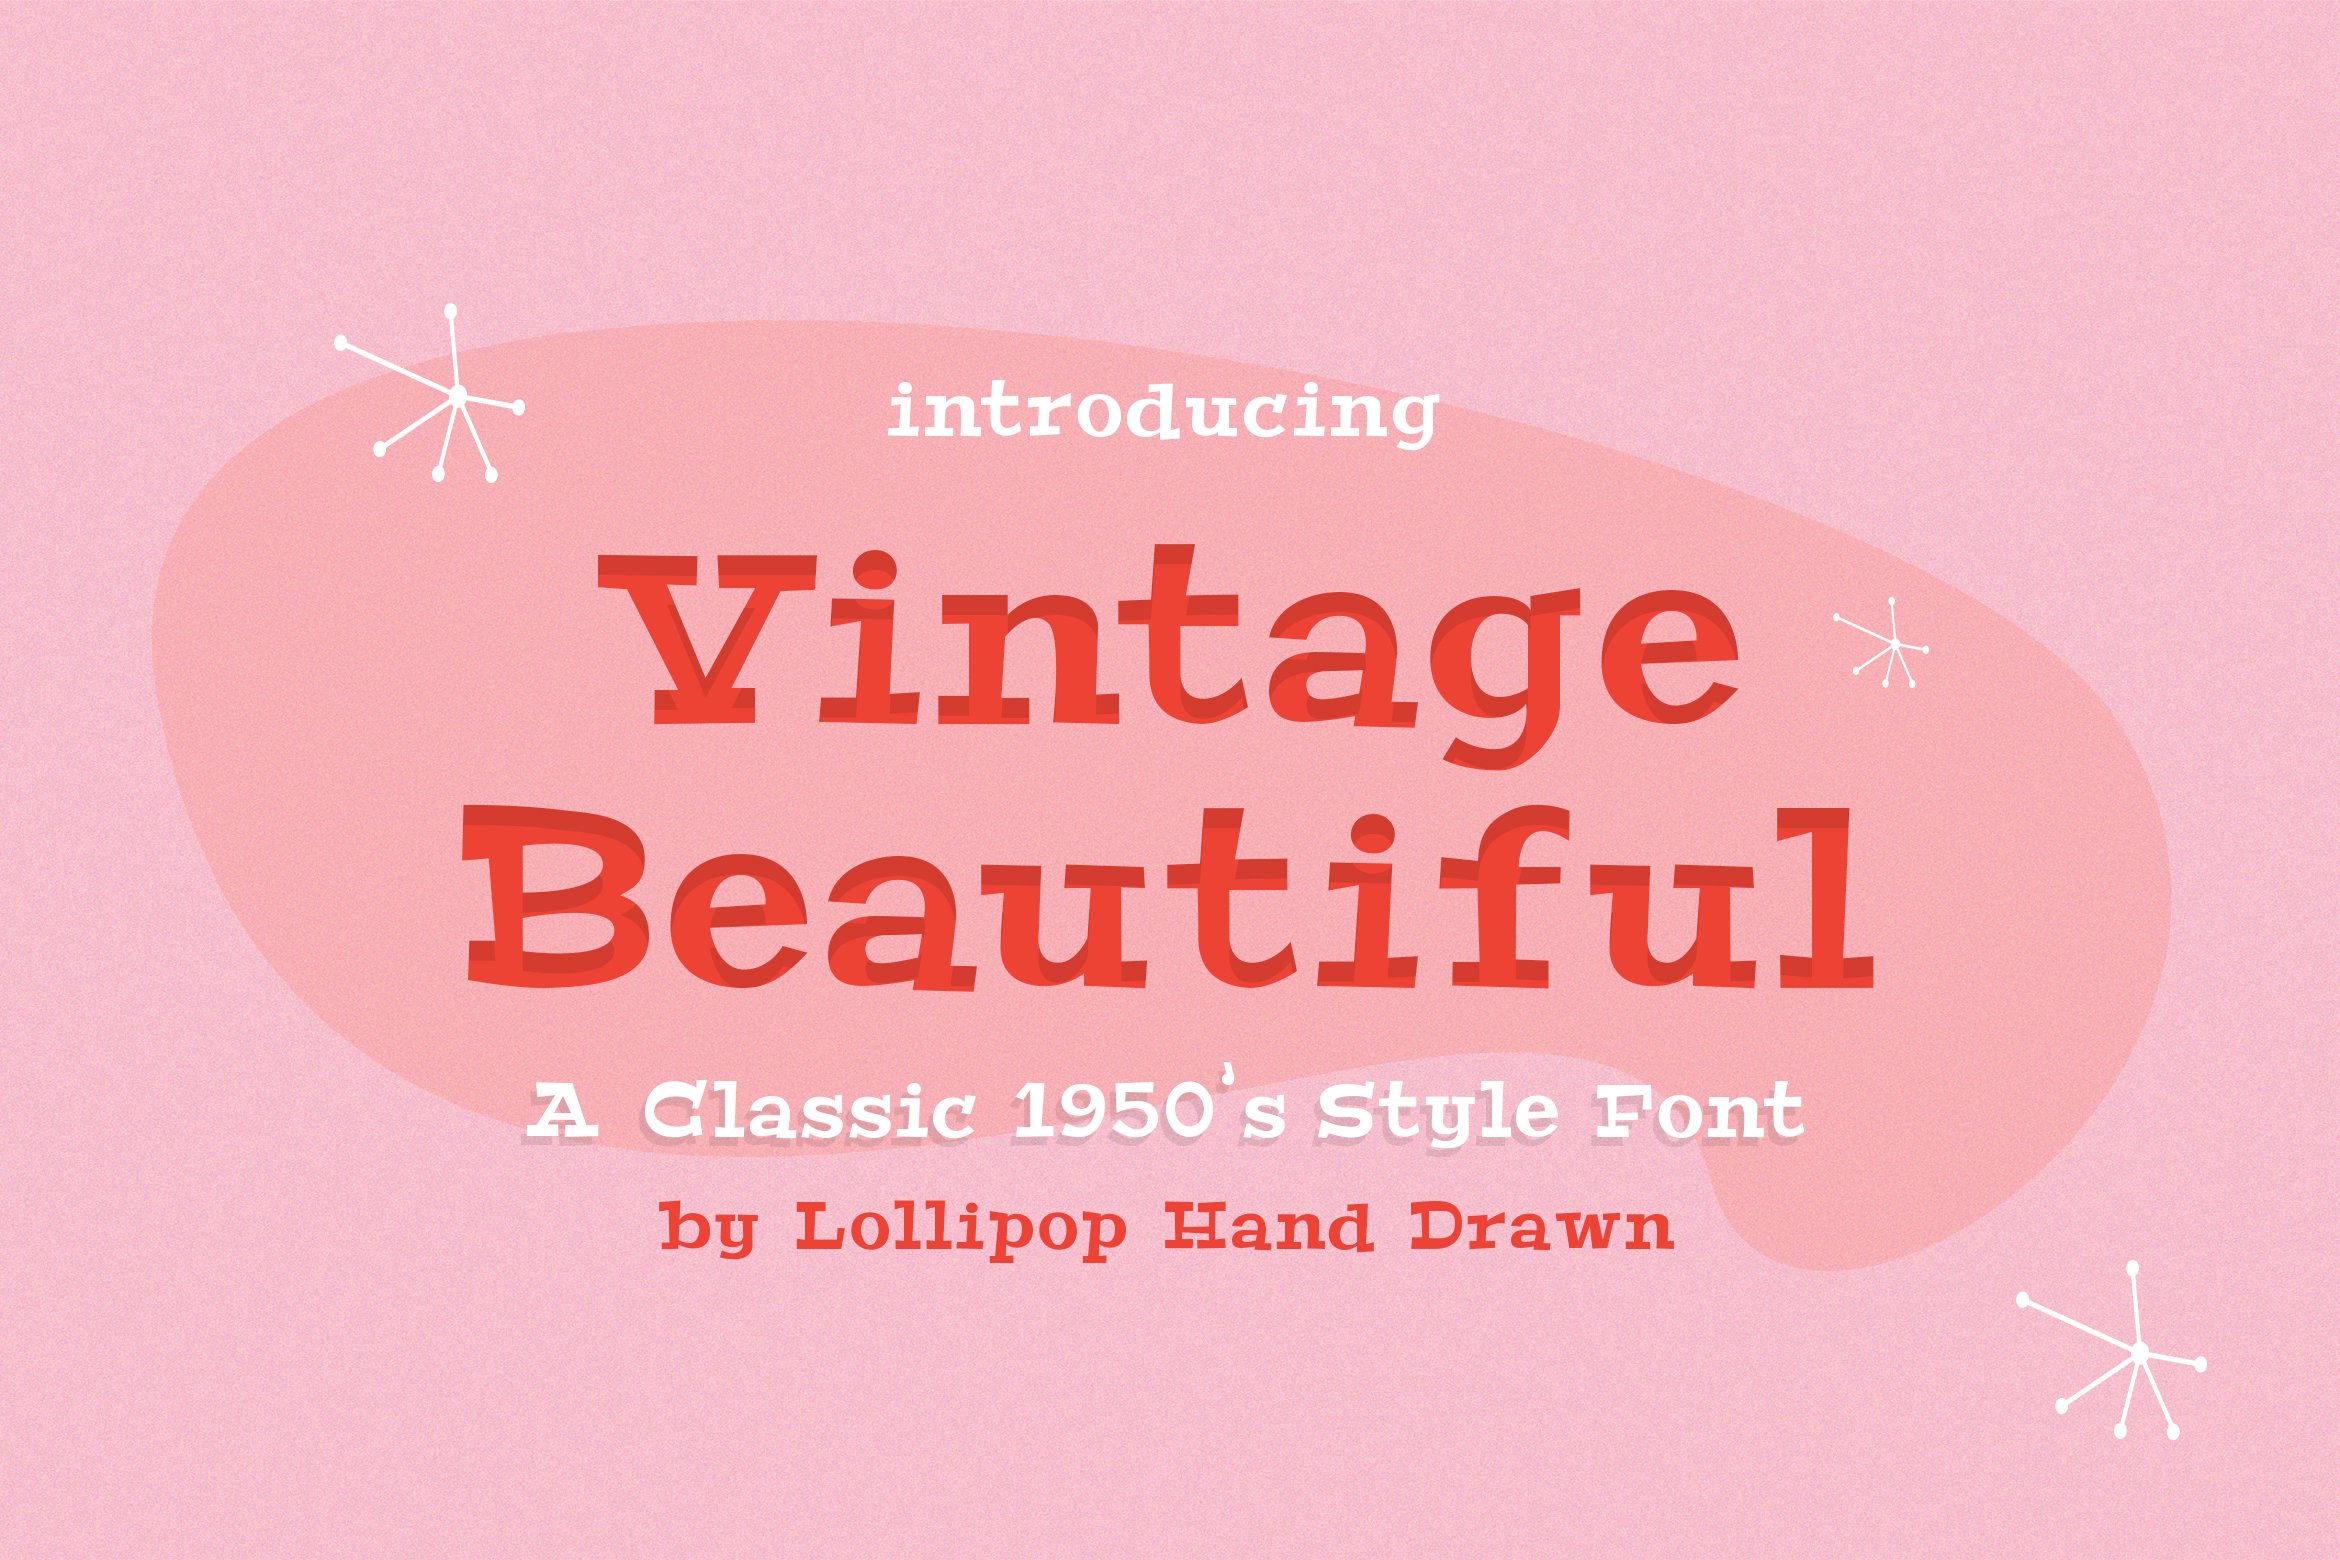 Vintage Beautiful Font cover image.